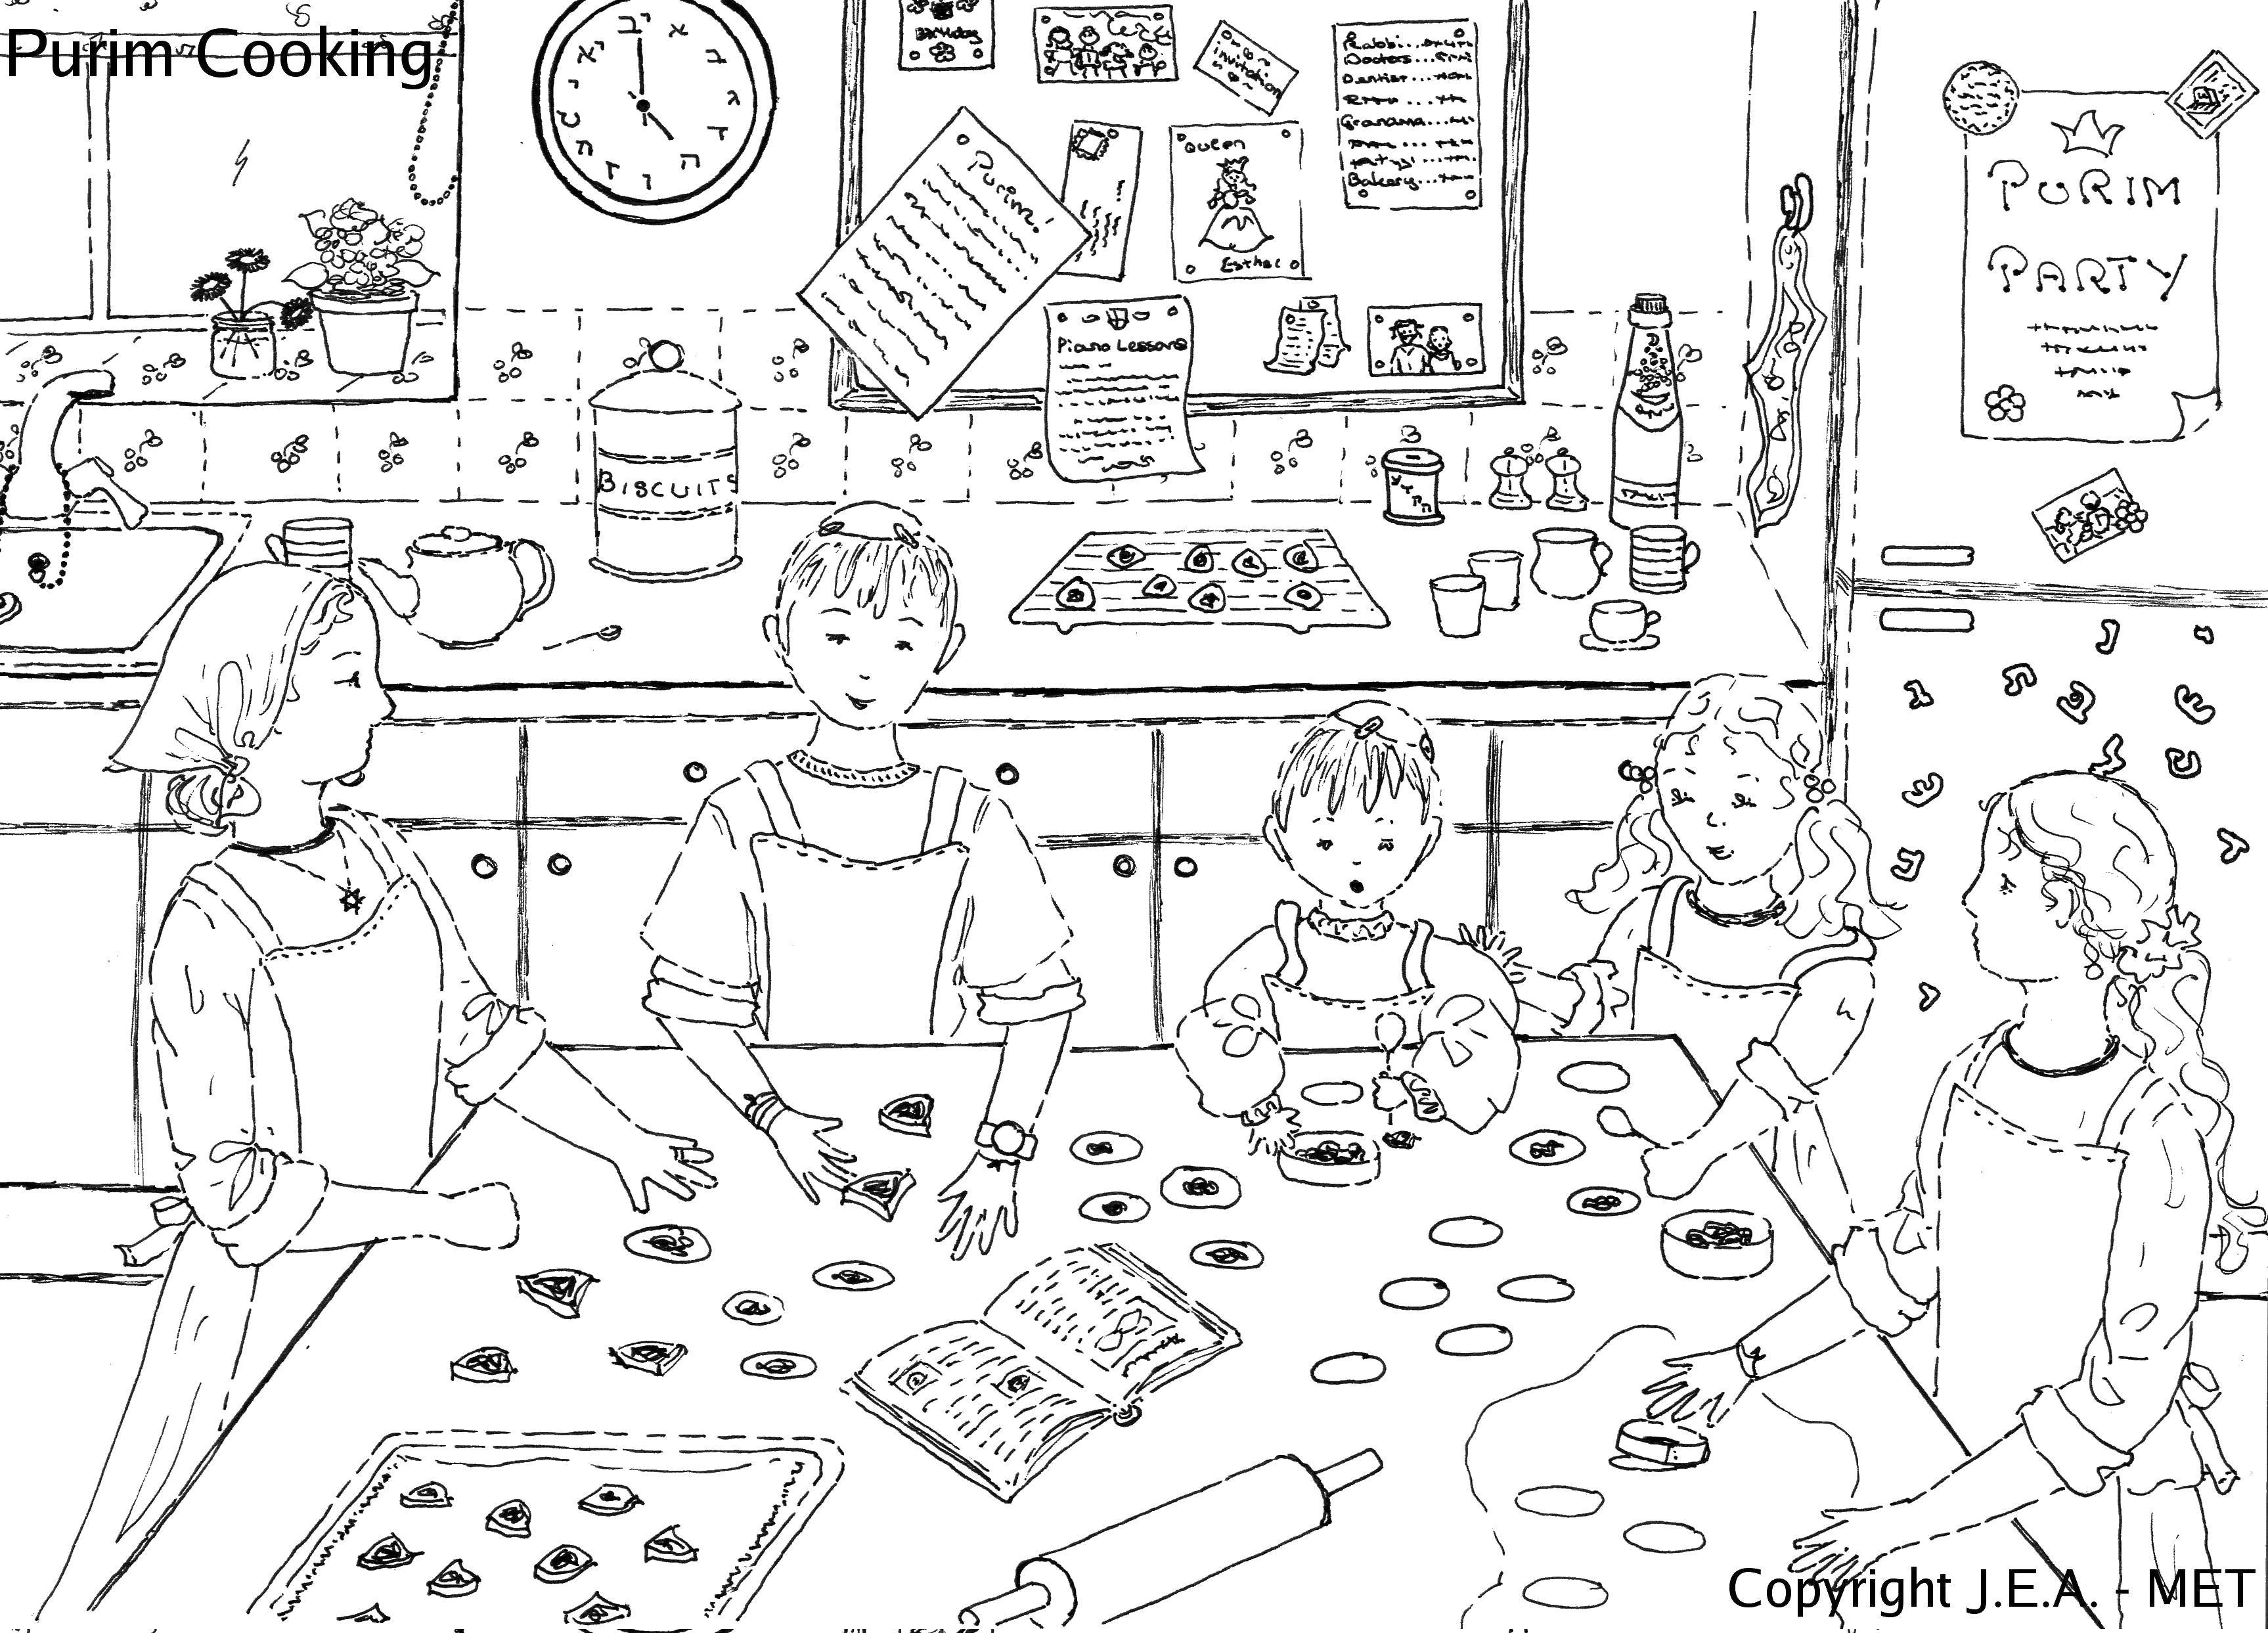 Coloring Family in the kitchen. Category Kitchen. Tags:  family, table, stove.